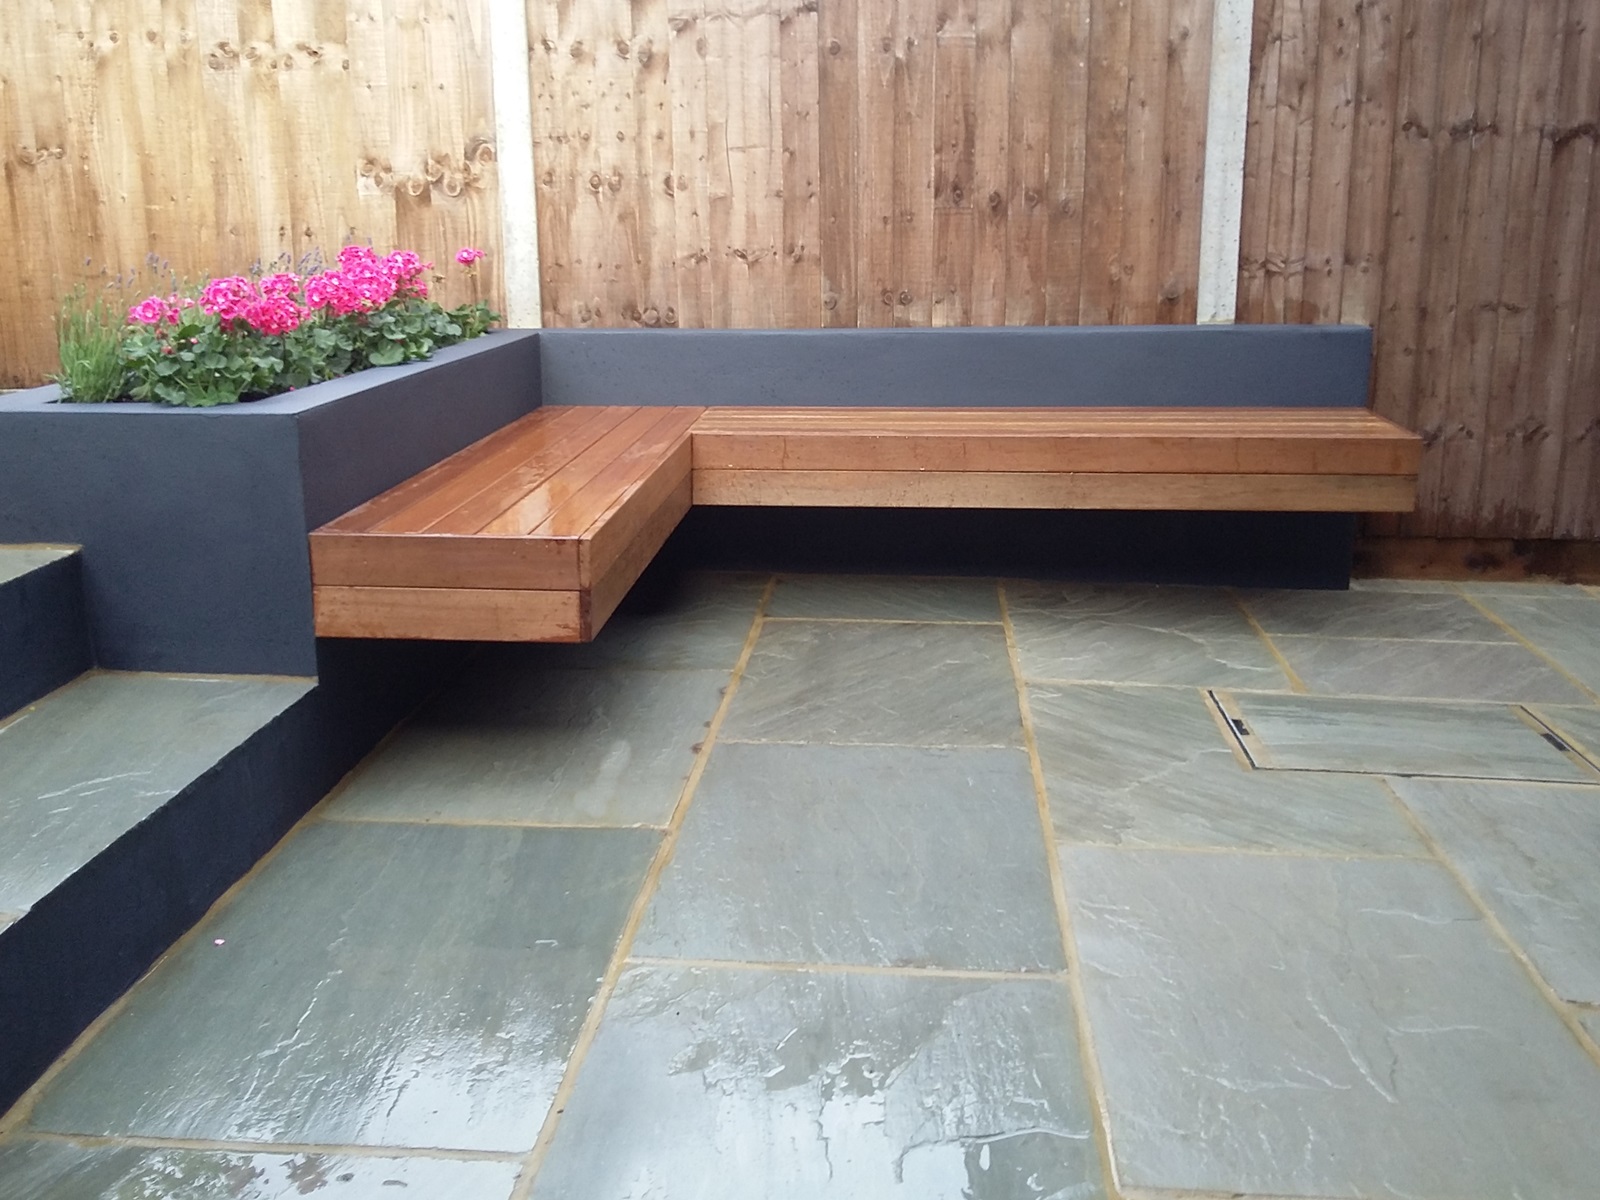 floating bench raised grey painted beds garden design london clapham battersea dulwich